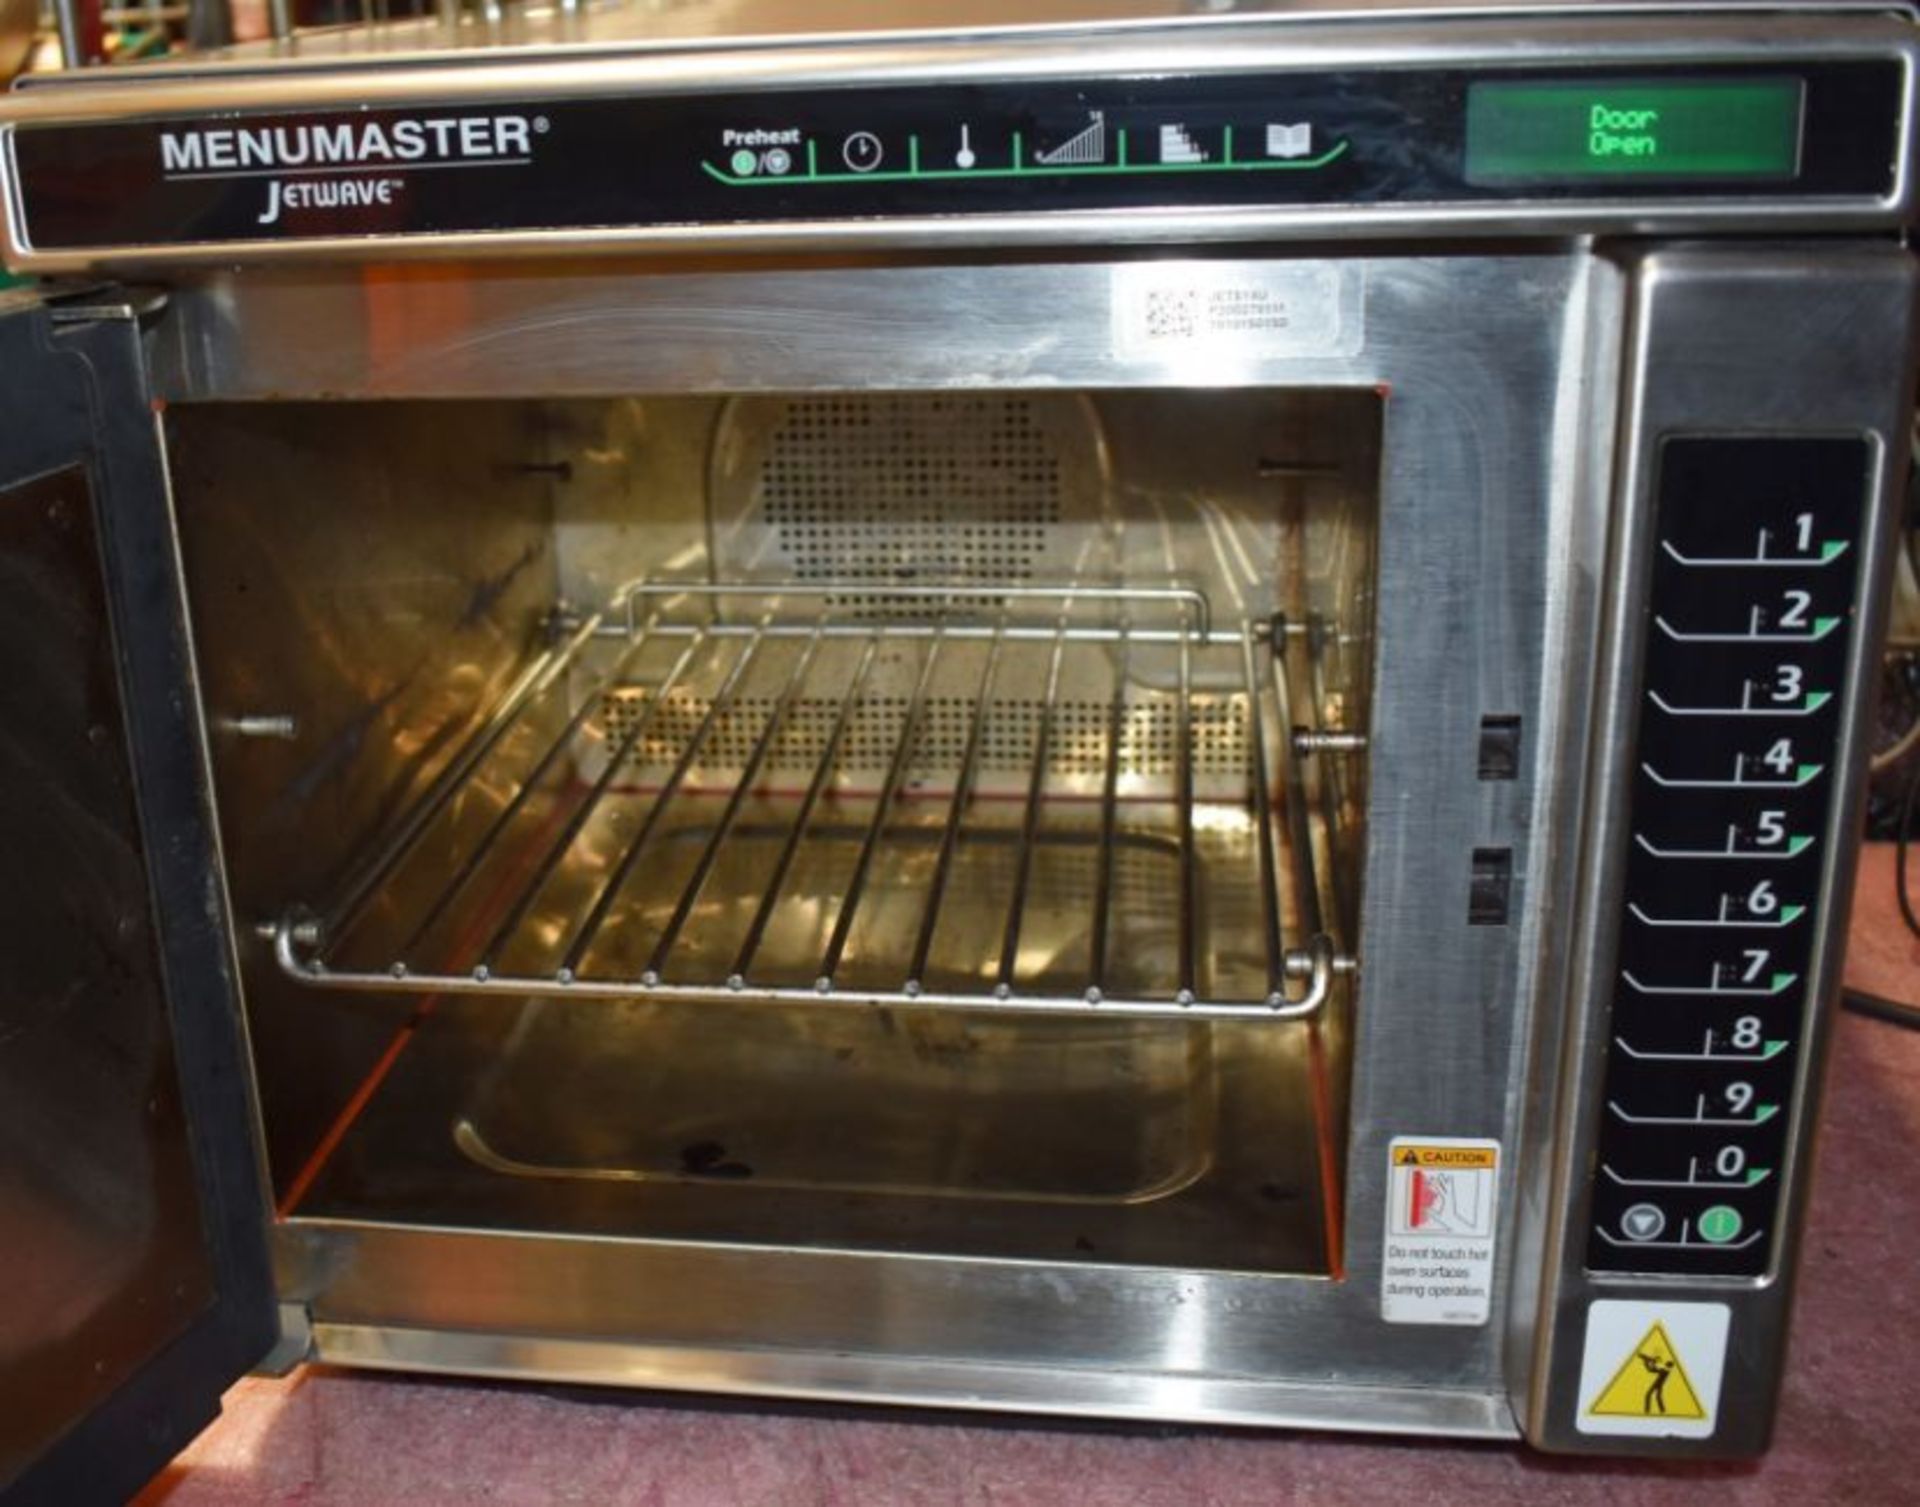 1 x Menumaster Jetwave JET514U High Speed Combination Microwave Oven - RRP £2,400 - CL232 - Ref: IN2 - Image 7 of 9